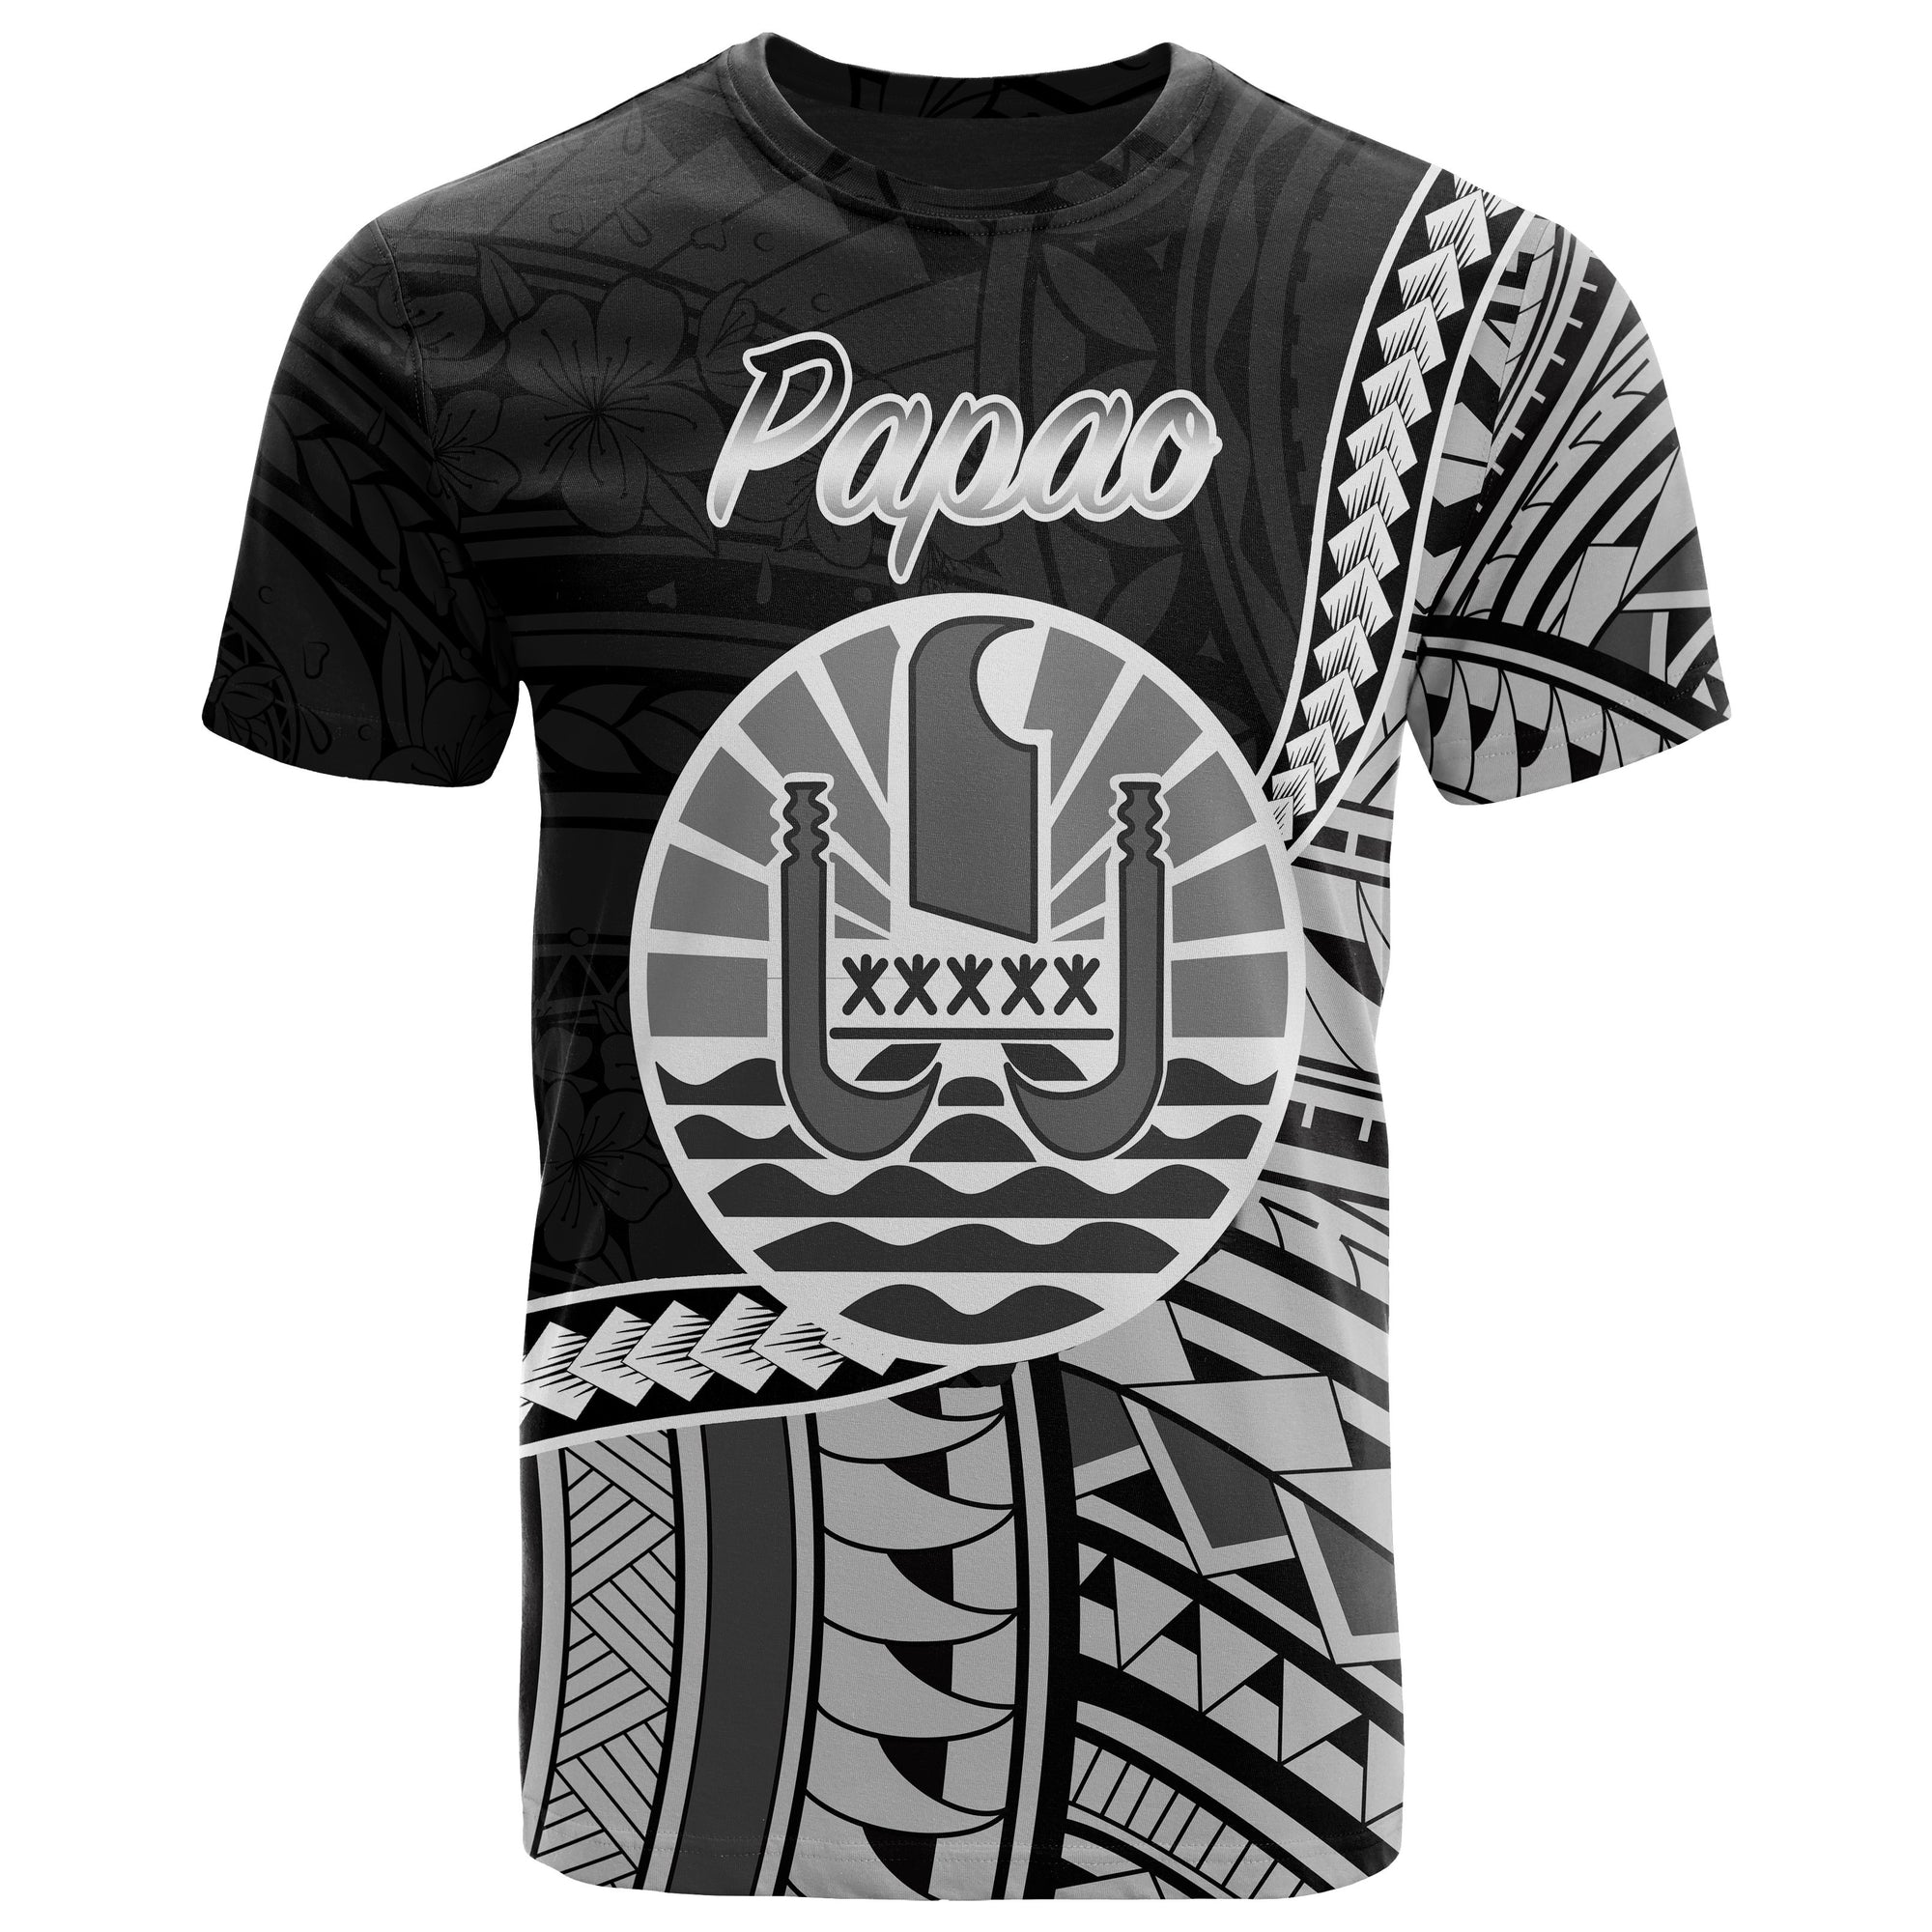 French Polynesia T Shirt Papao Seal of French Polynesia Polynesian Patterns Unisex Black - Polynesian Pride